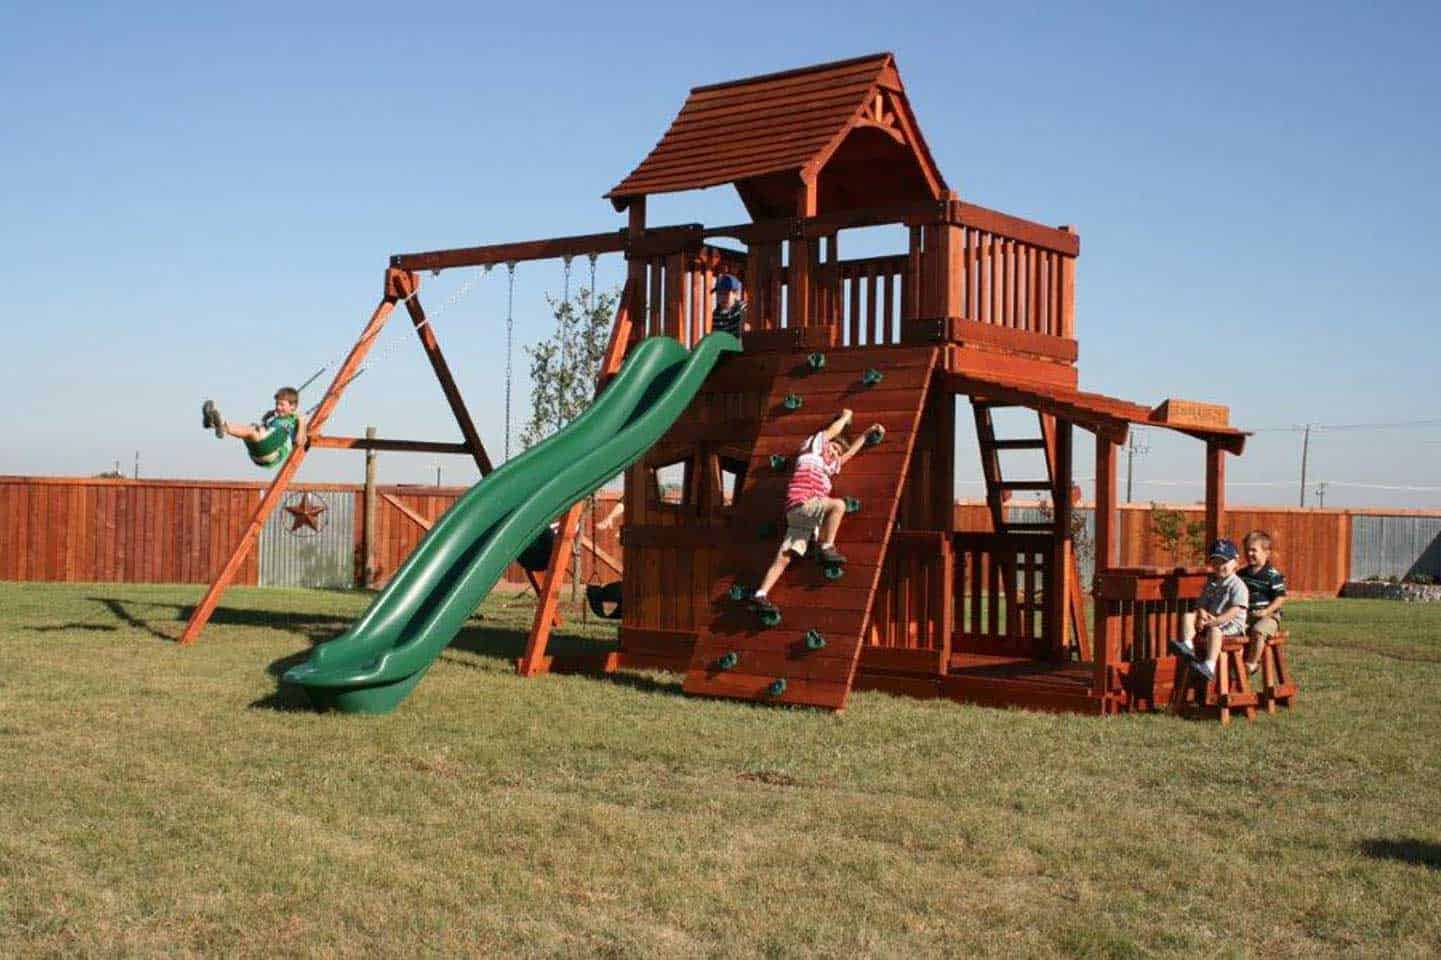 mustang swing set, cabin, rock wall, extended porch, lemonade, wooden swing set, swing set, swings, slide, swing set for kids, kids, children, play, playground, playset, sets, accessories, backyard swing set